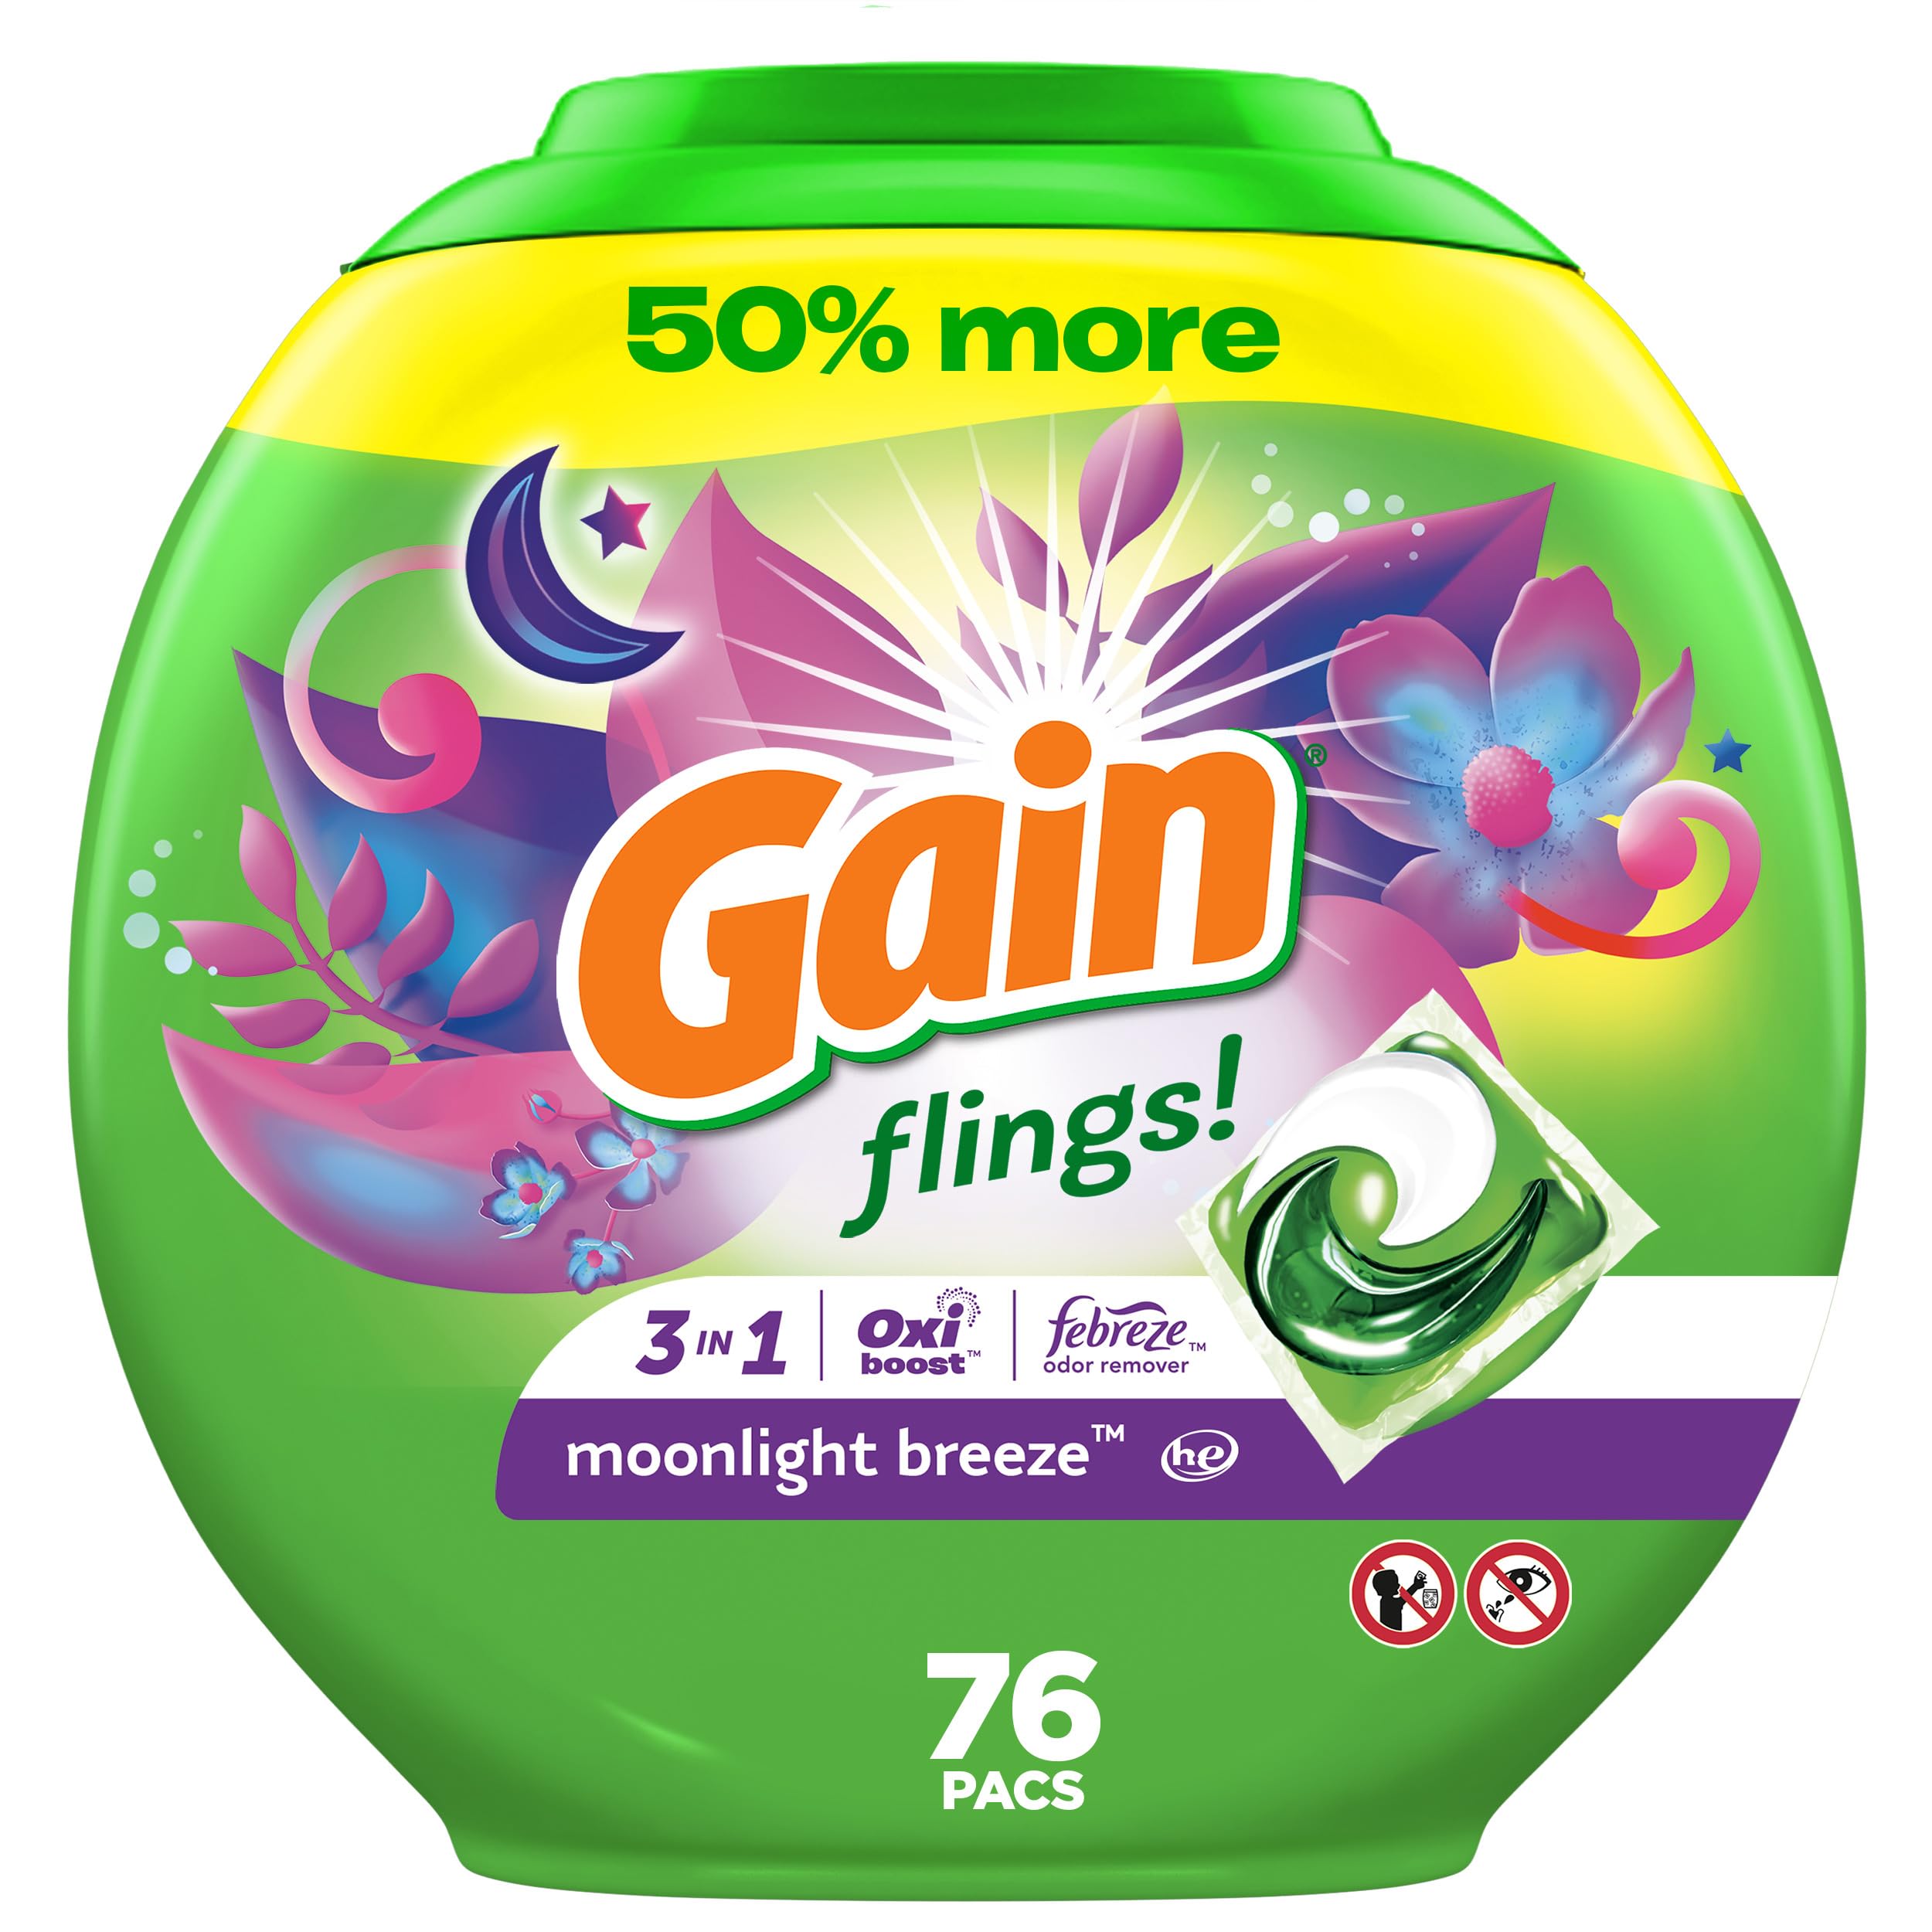 76-Count Gain flings Laundry Detergent Soap Pacs (Moonlight Breeze Scent) $18.99 + $11.50 Amazon Credit + Free Shipping w/ Prime or on $35+